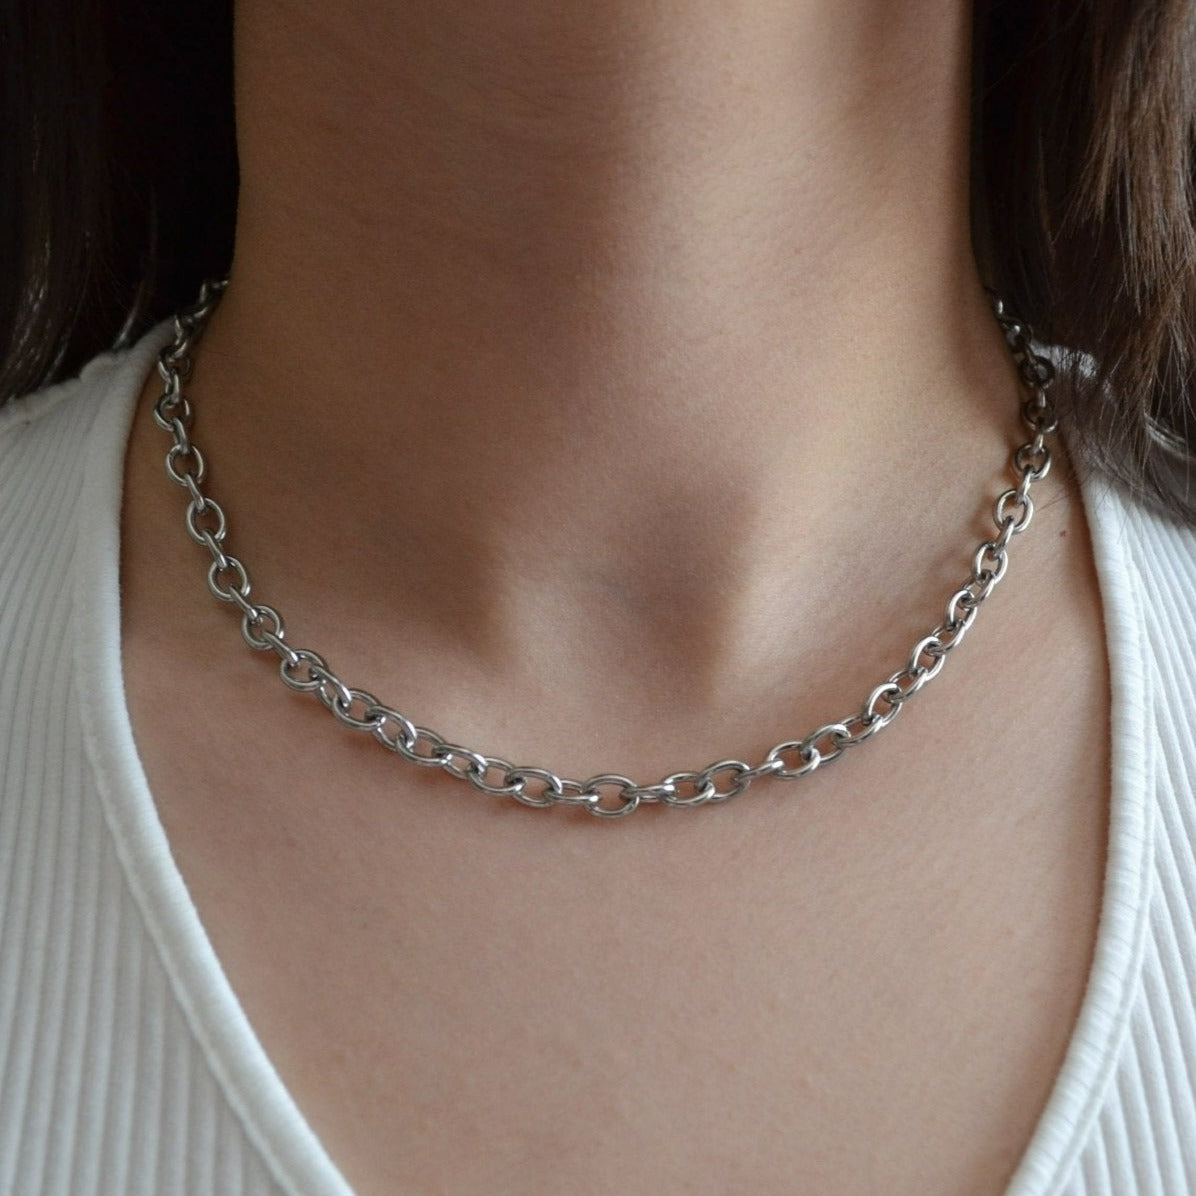 Chunky Silver 6mm Rolo Chain Necklace For Men or Women - Necklace - Boutique Wear RENN